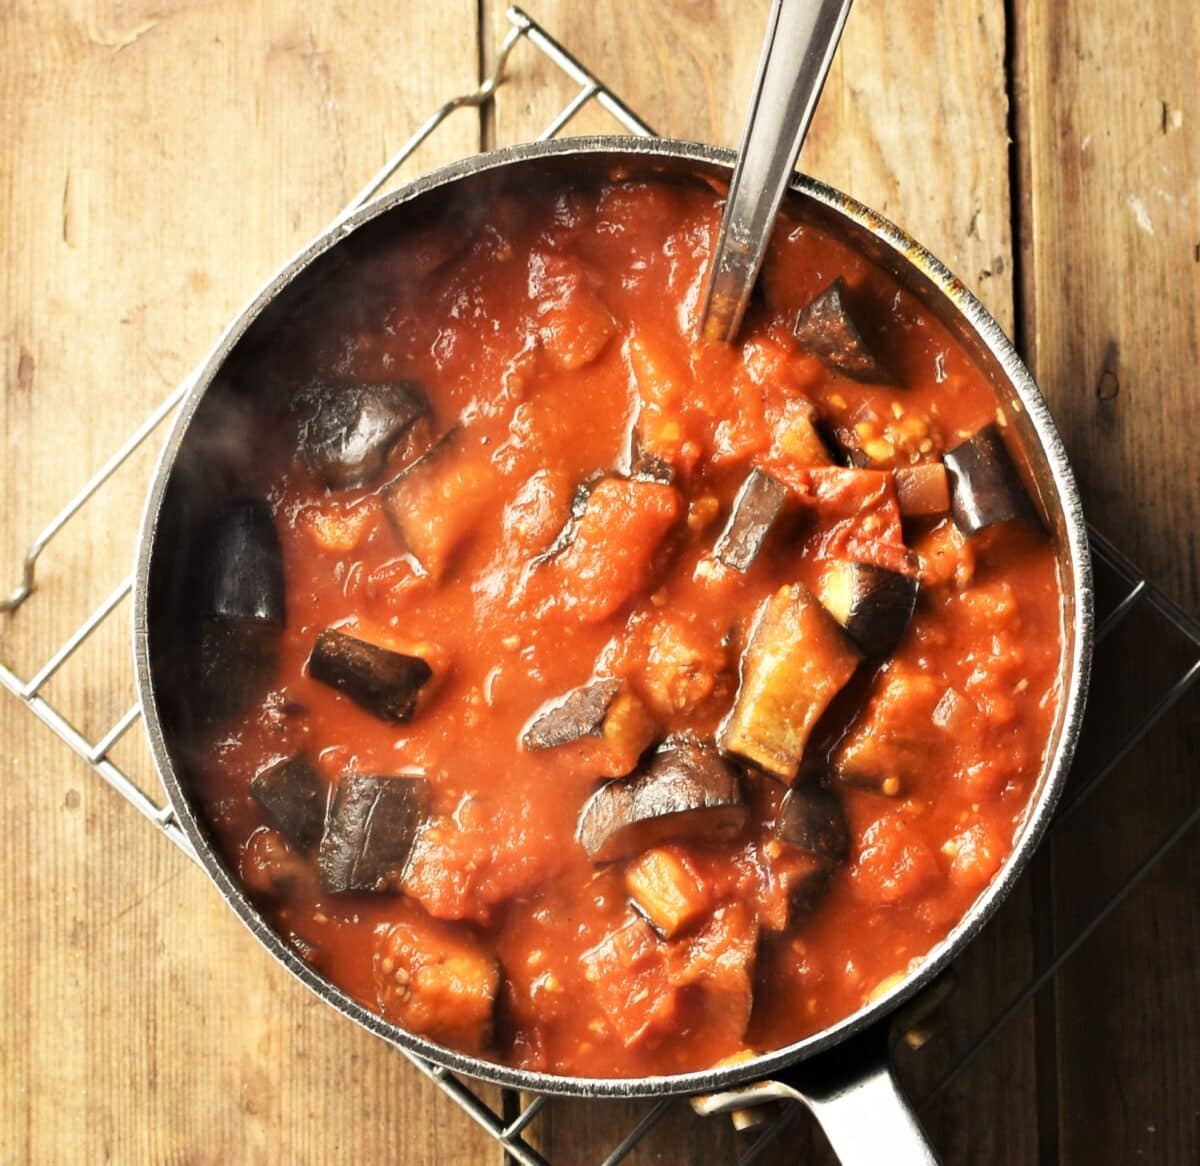 Top down view of eggplant and tomato sauce in large pot with spoon.